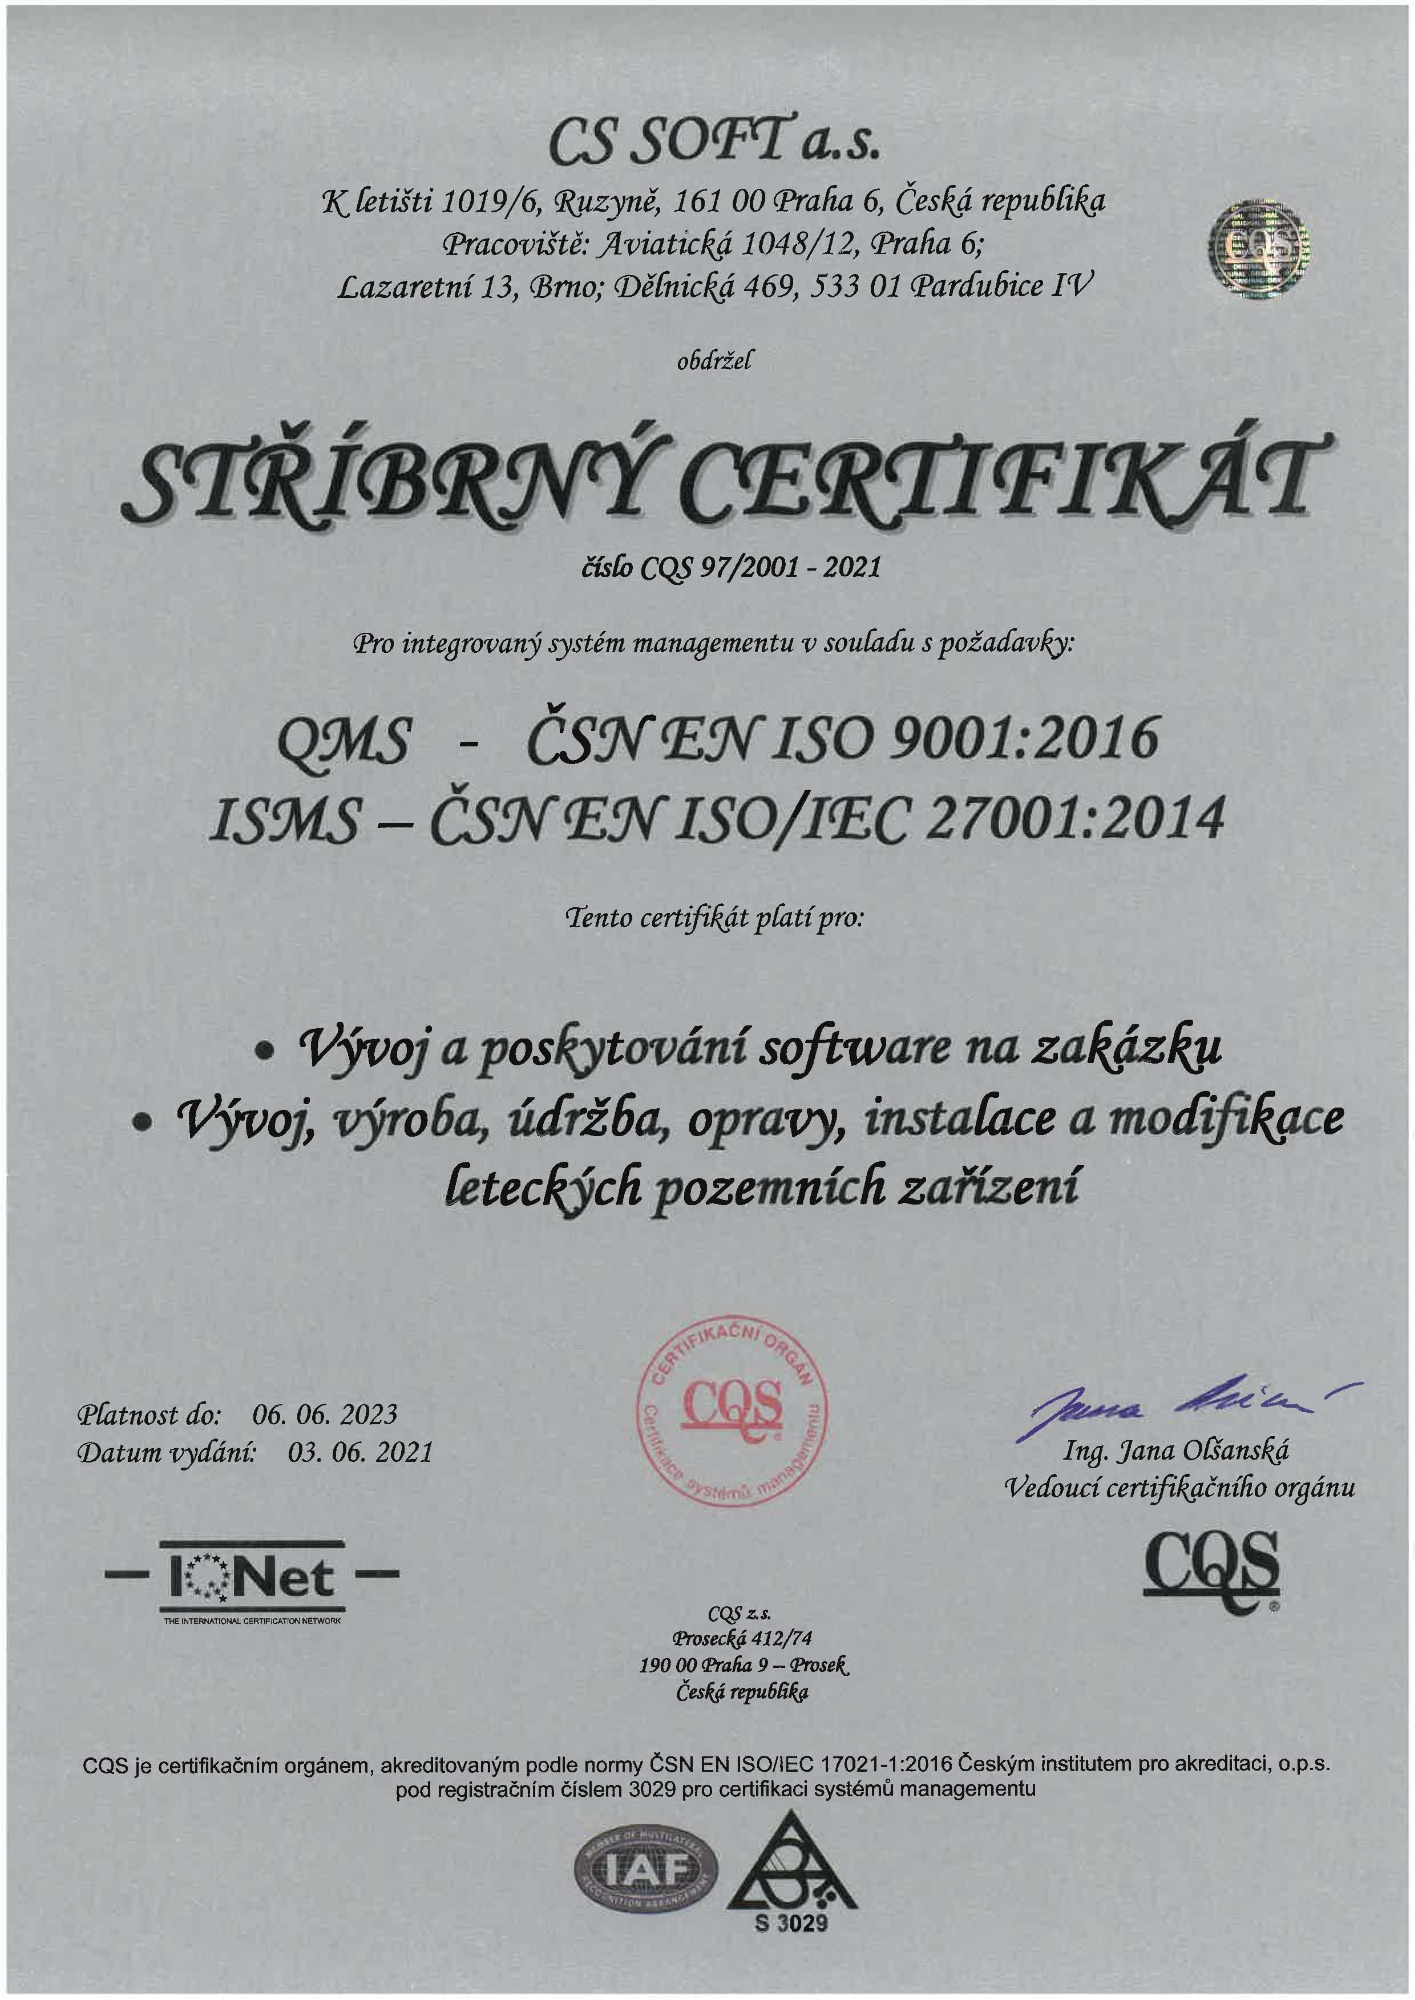 CS SOFT has a new certification – ISO 27001